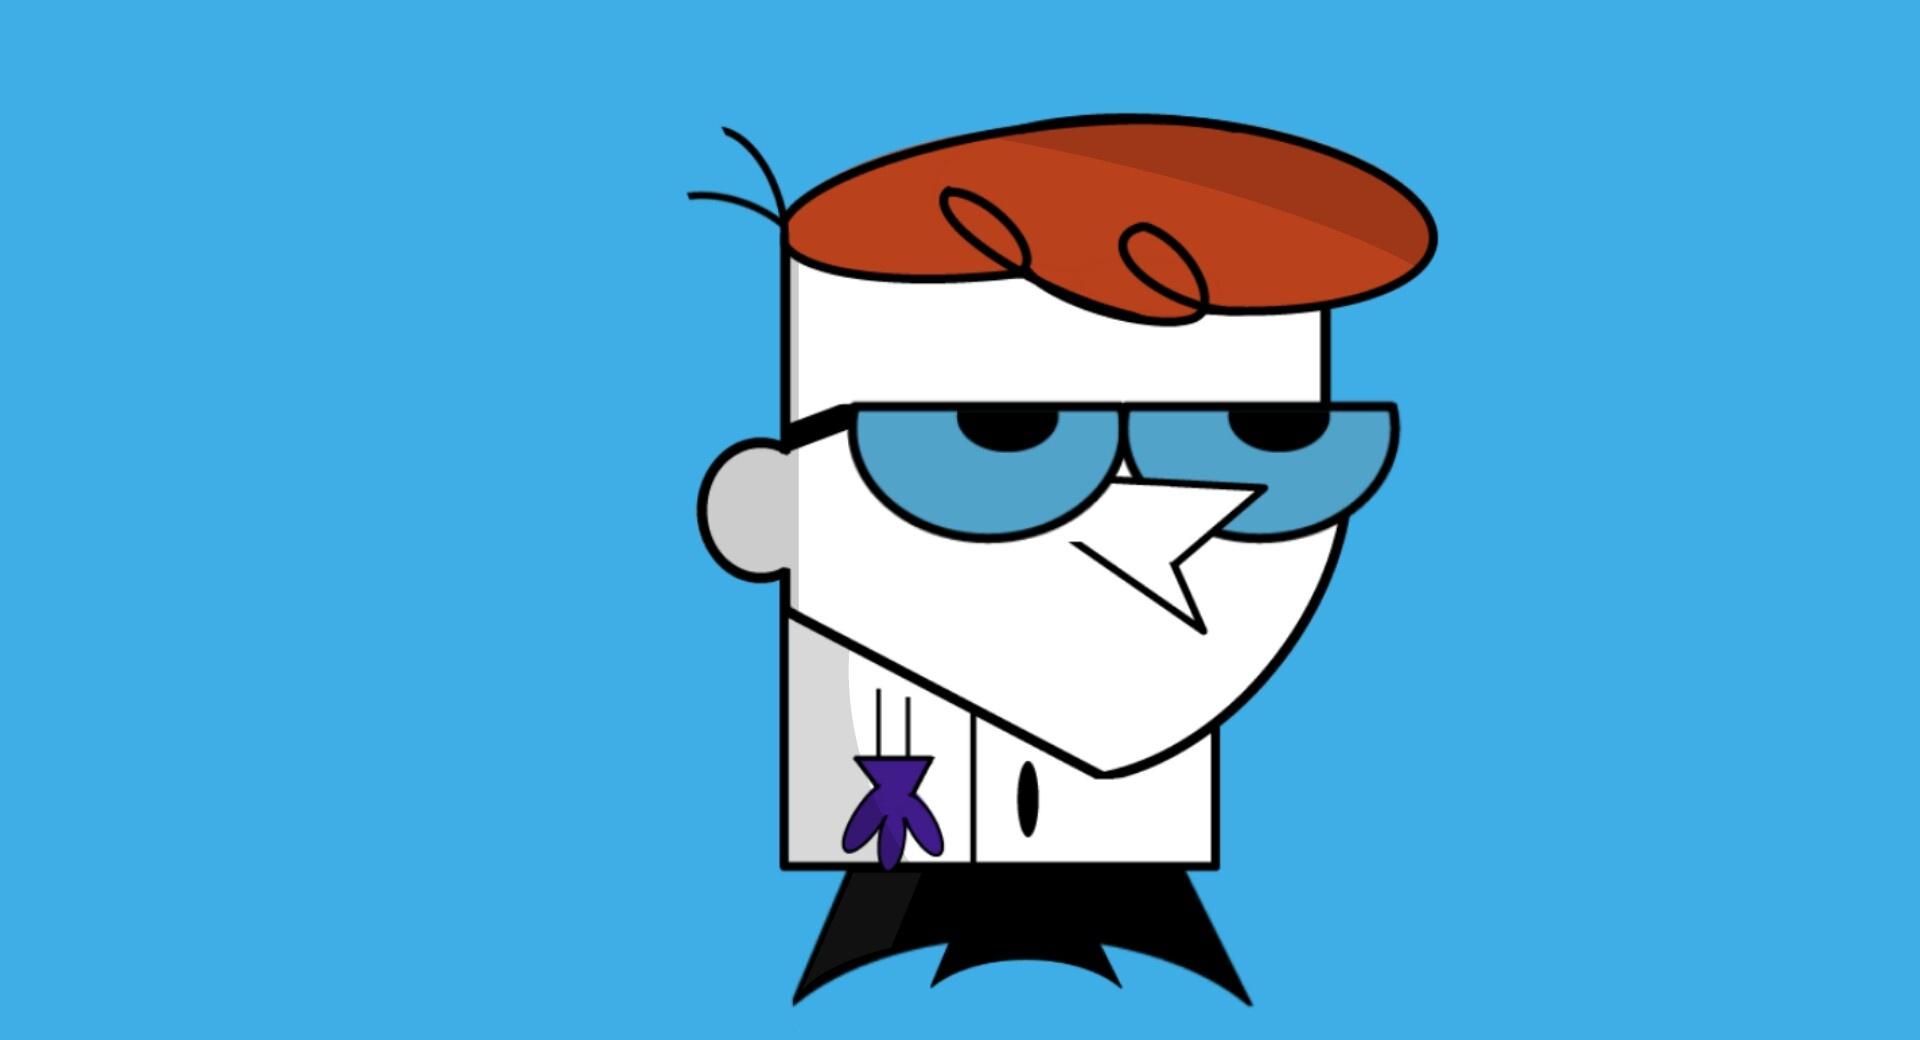 Laboratory The Dexter wallpapers HD quality